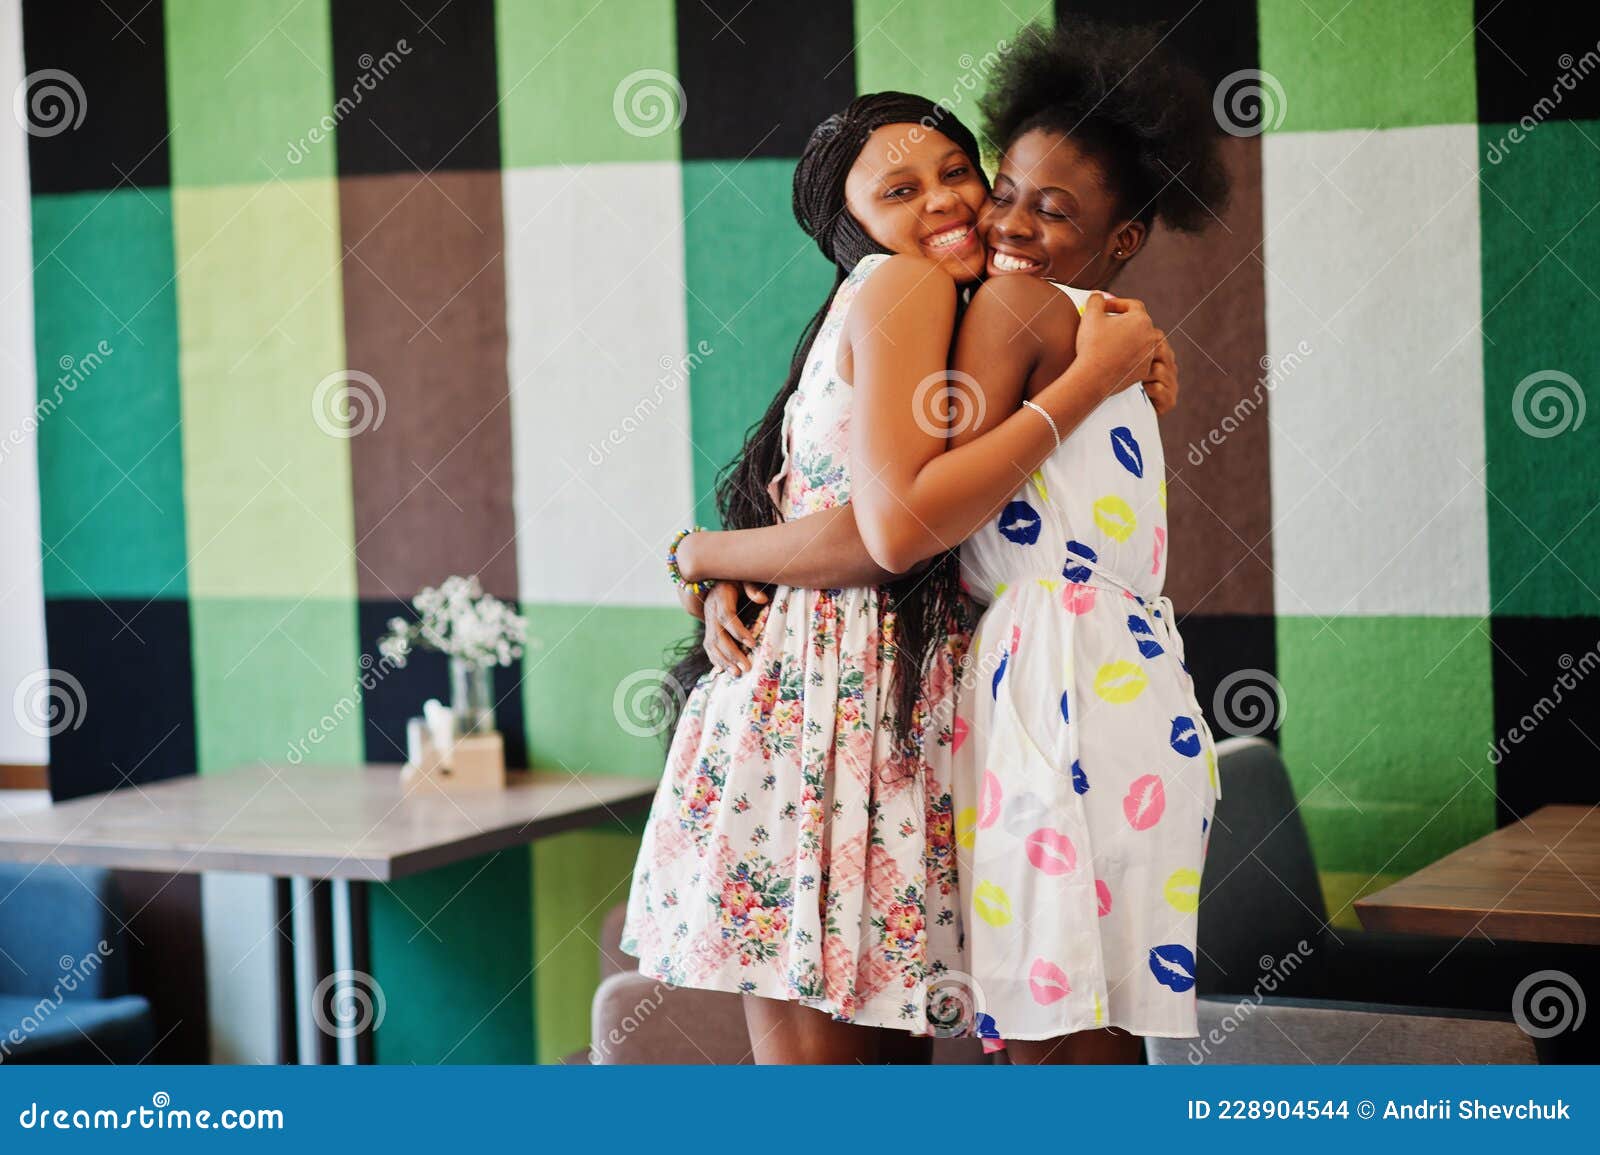 Two Black African Girlfriends at Summer Dresses Posed at Caf picture